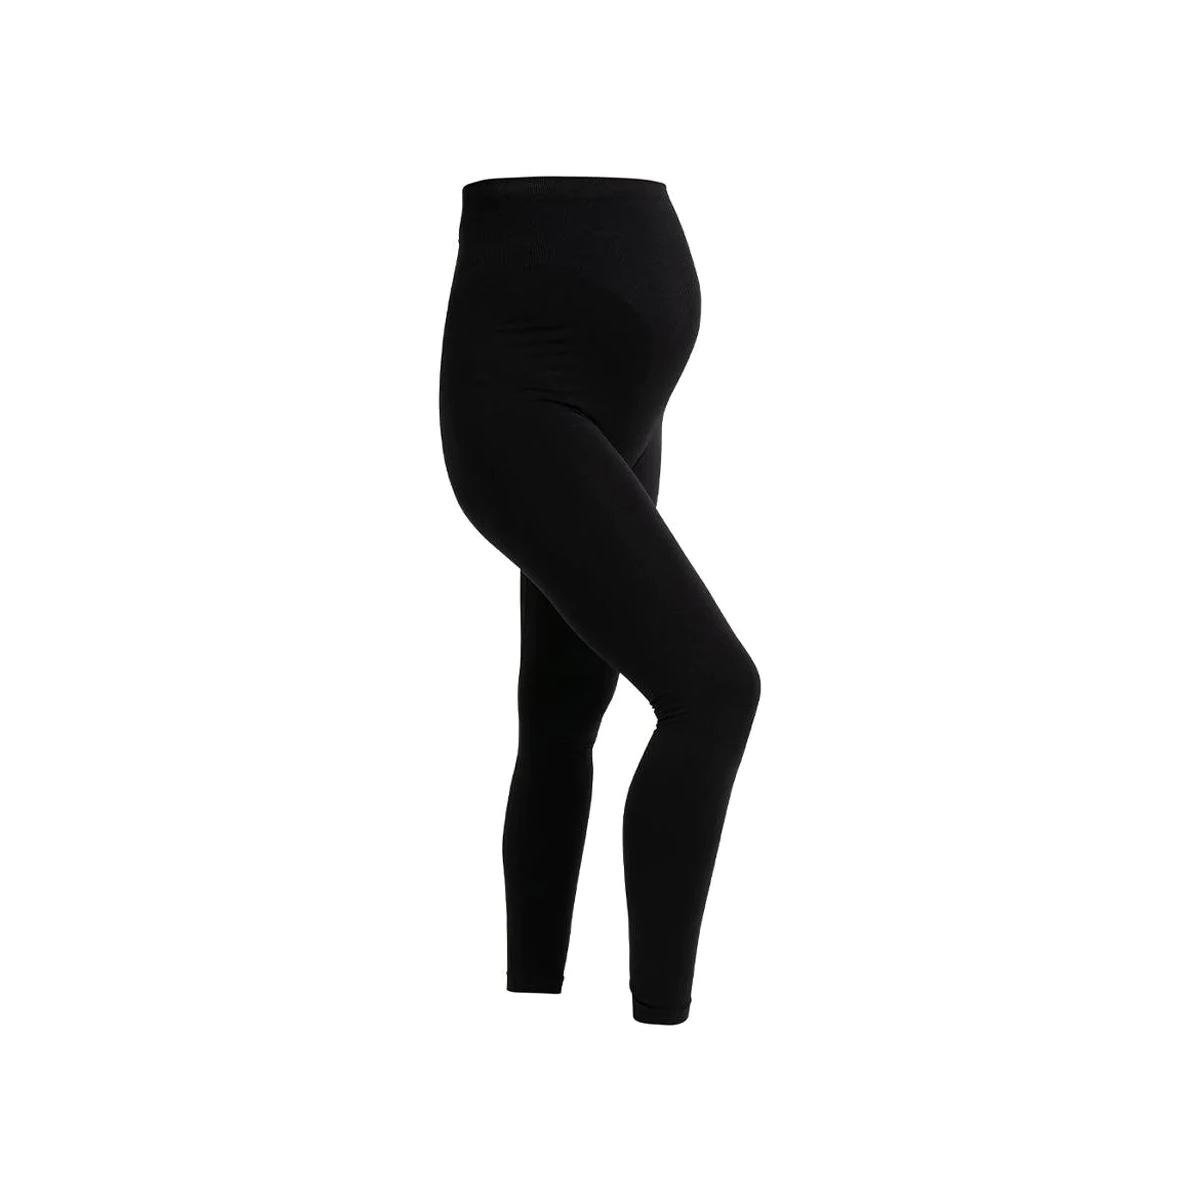 Carriwell Maternity Support Leggings - Black (Size - X